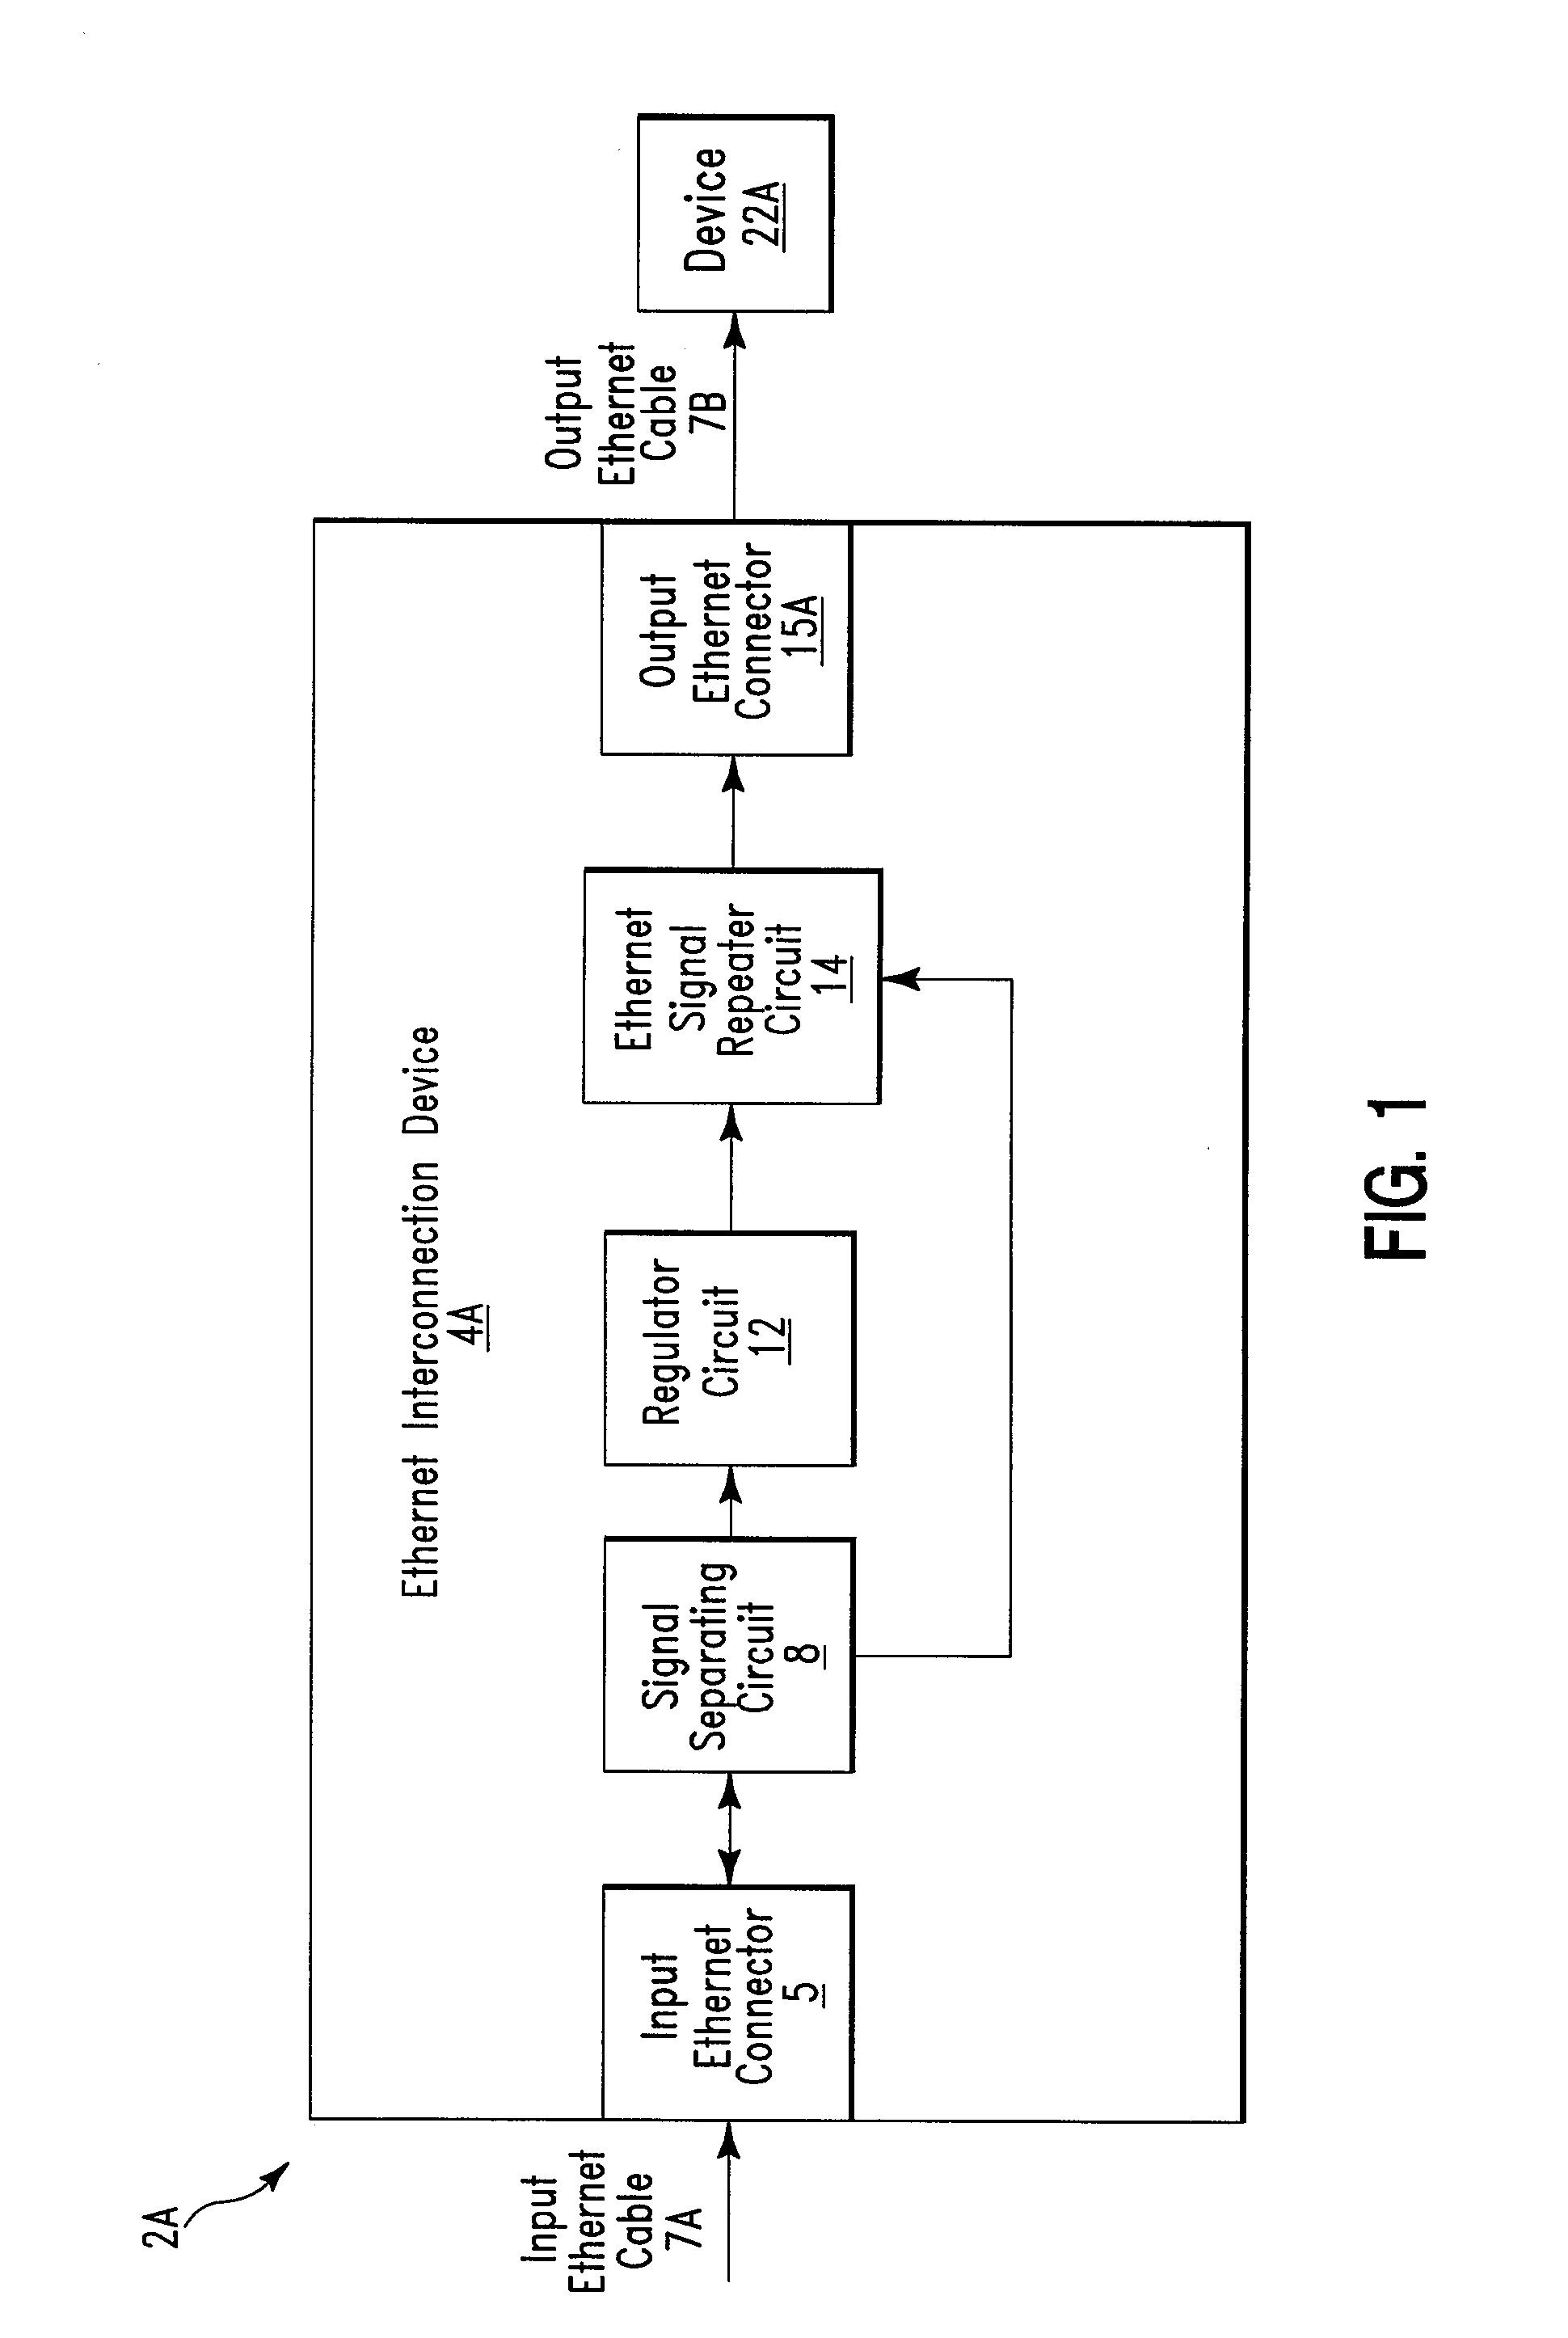 Ethernet interconnection apparatus and method